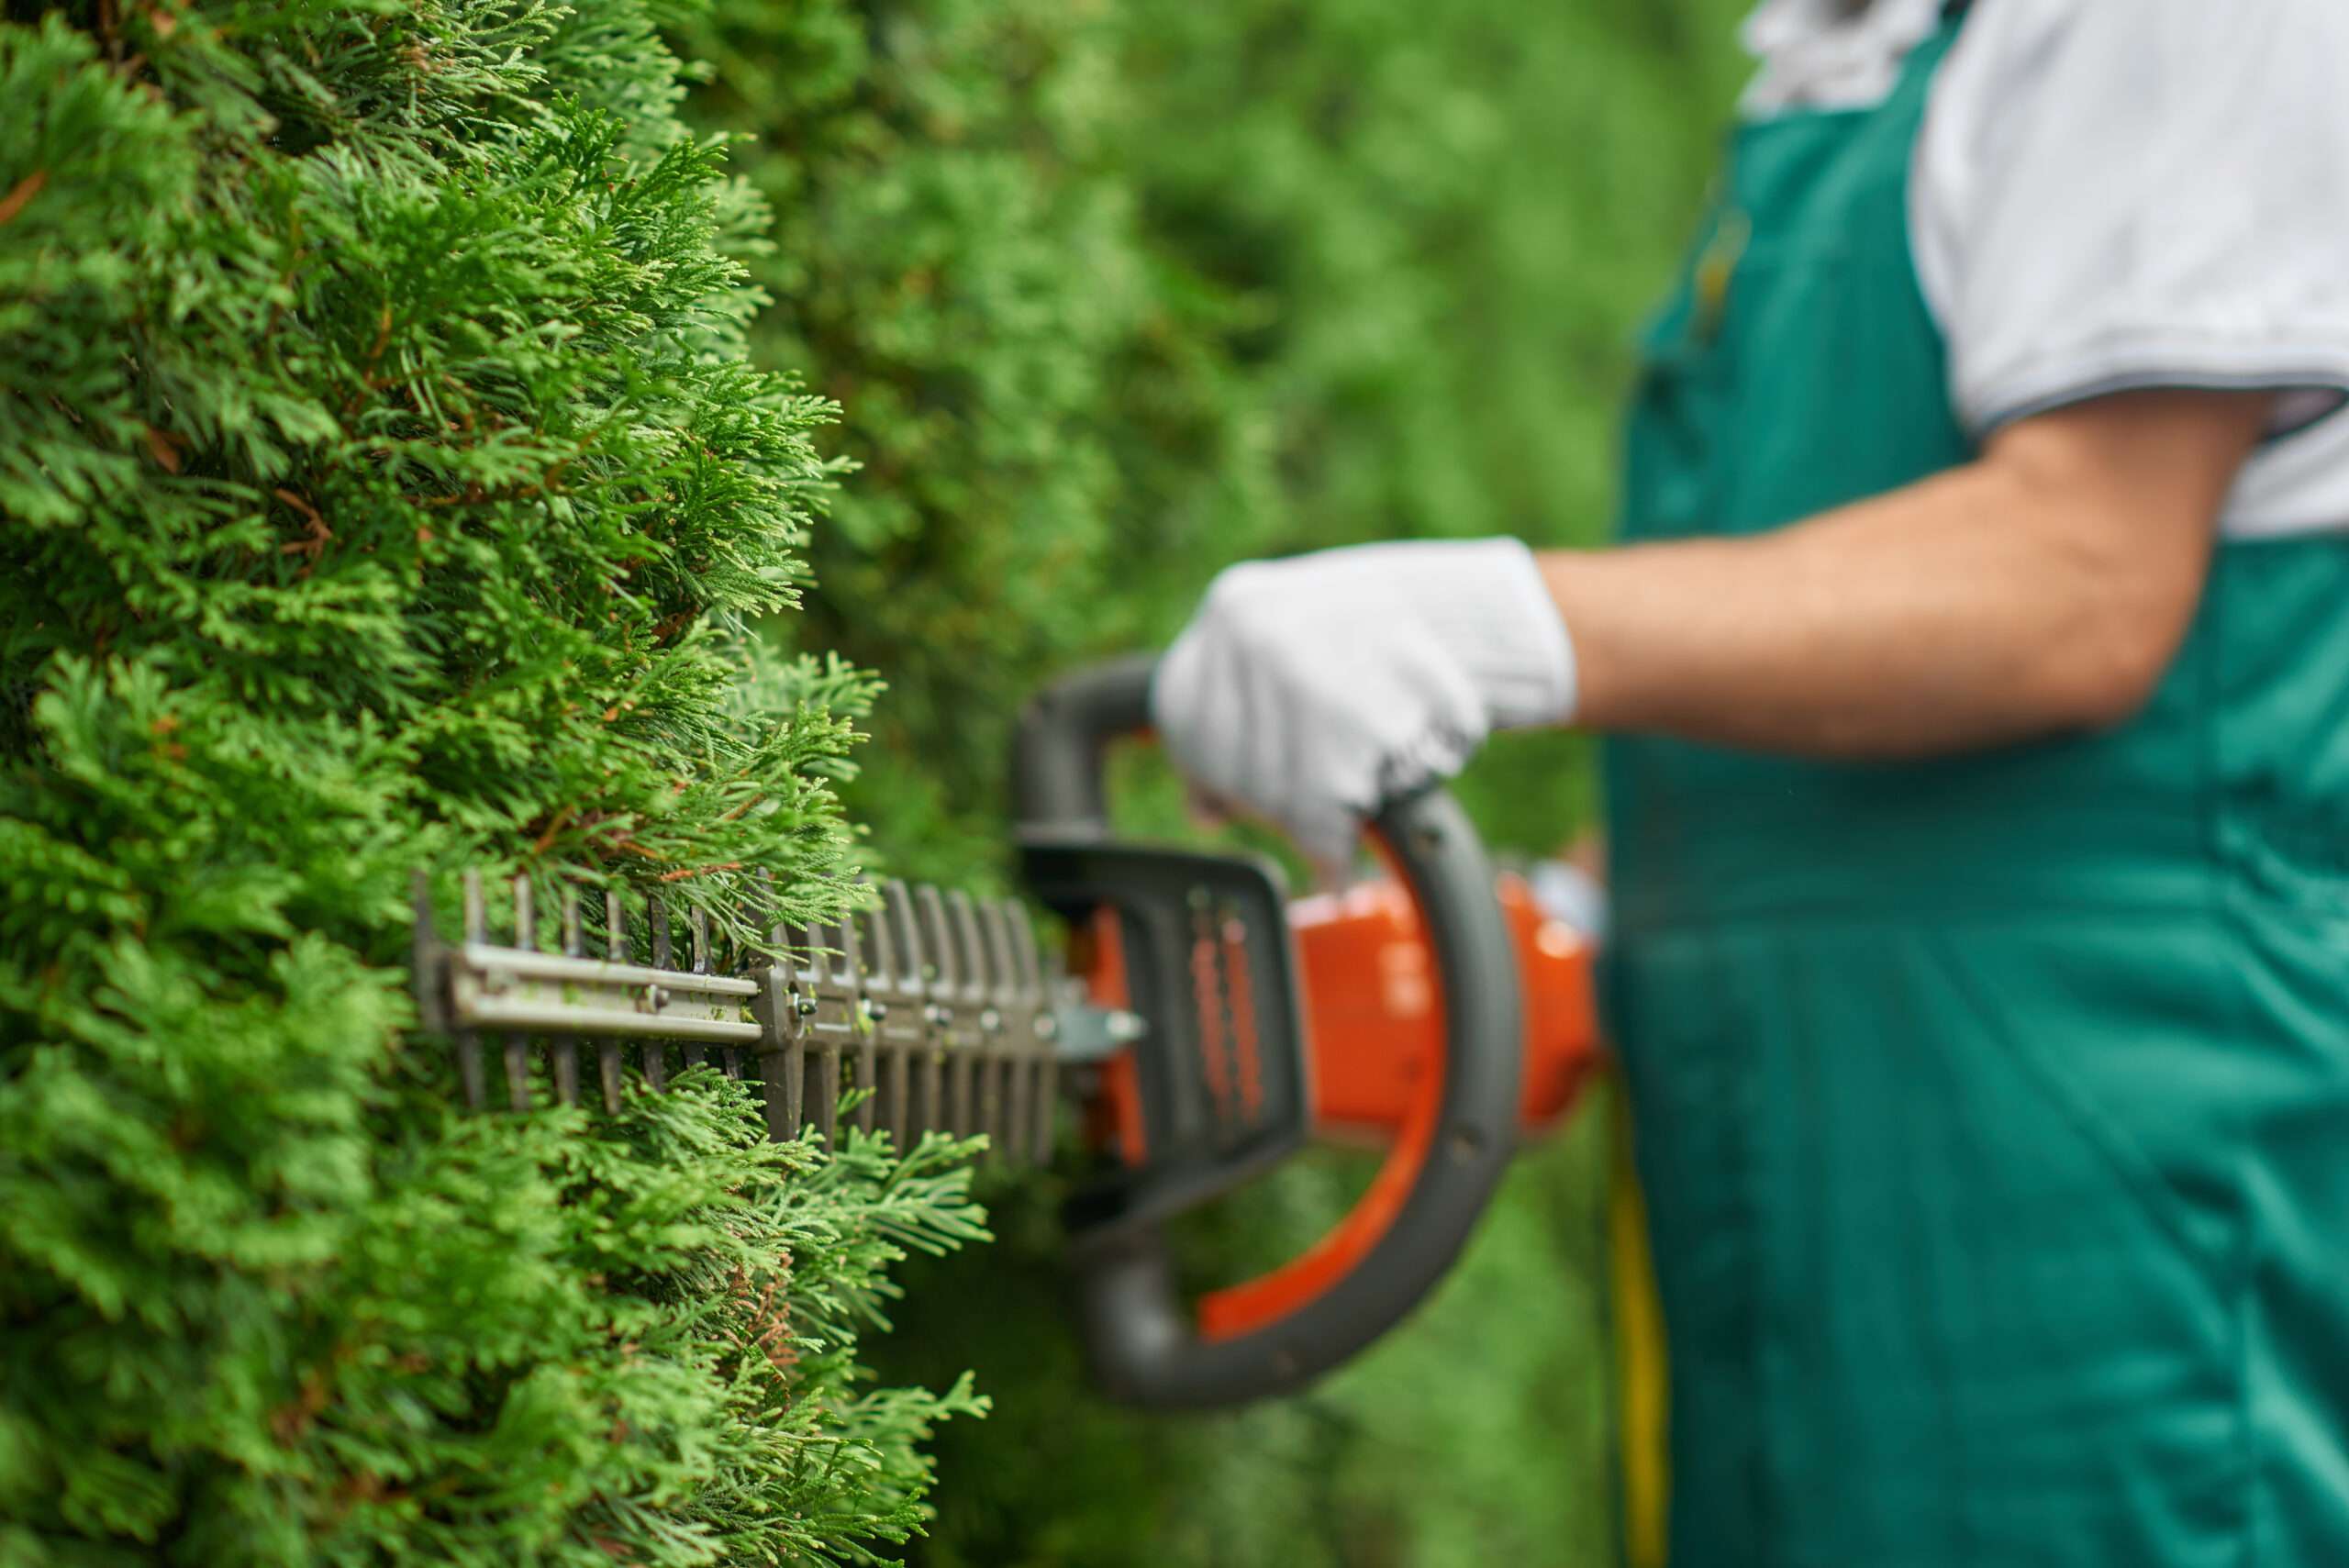 An Austin Zoning Technicality Made His Landscaping Business Illegal Overnight